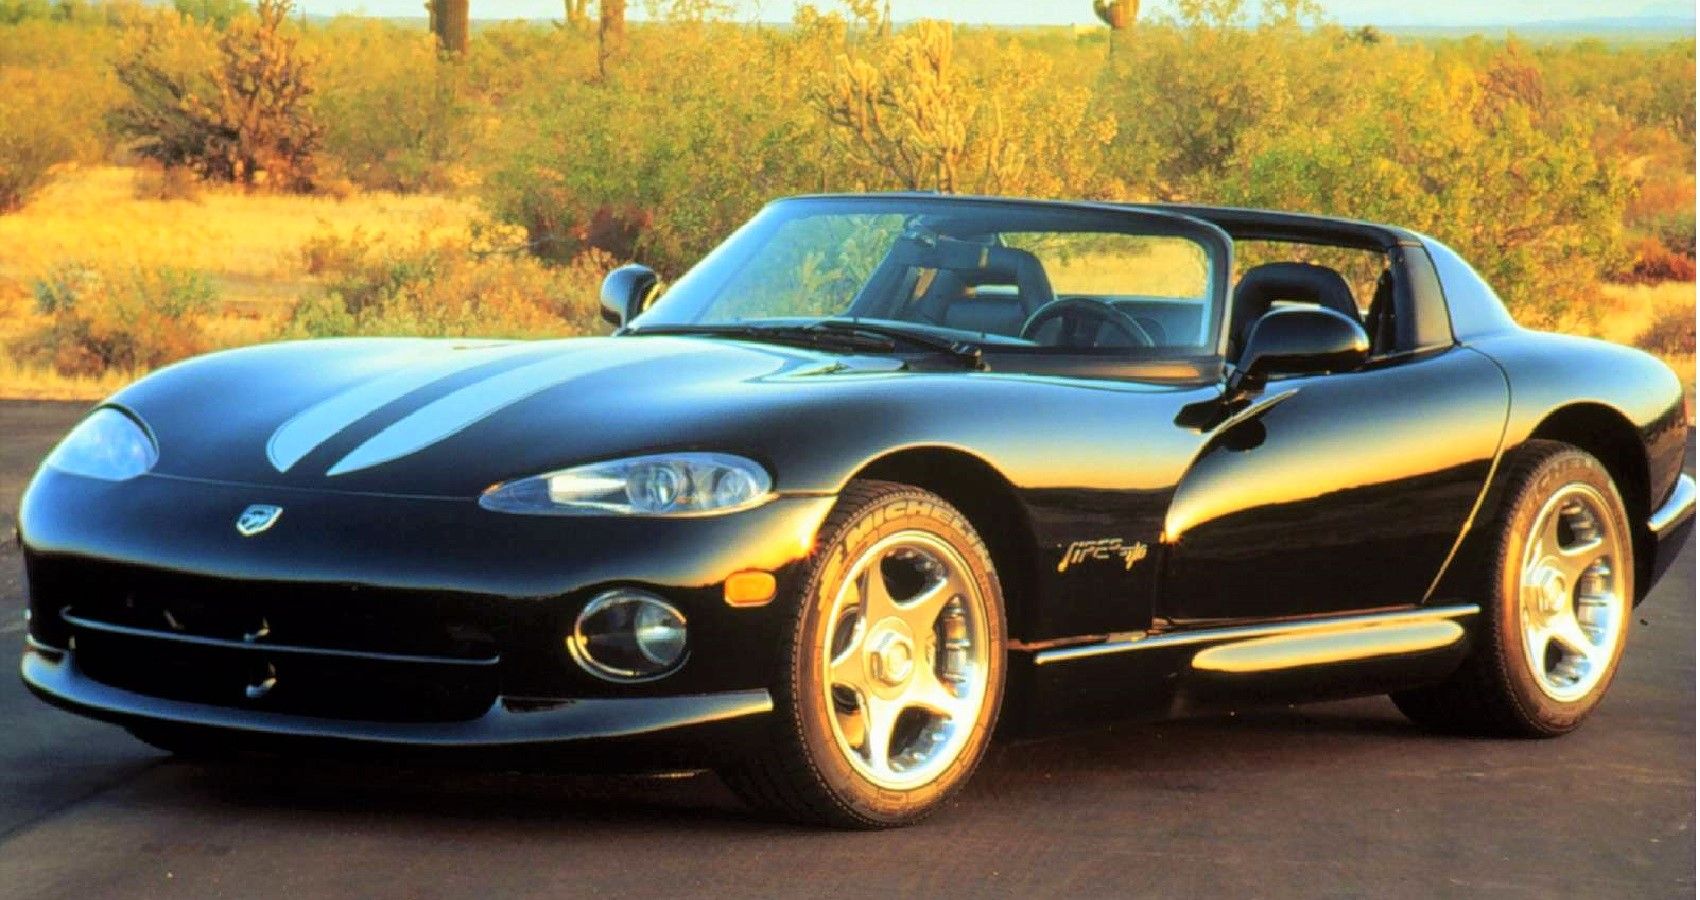 The Real Reason The V10 Dodge Viper Was A Difficult Sports Car To Tame